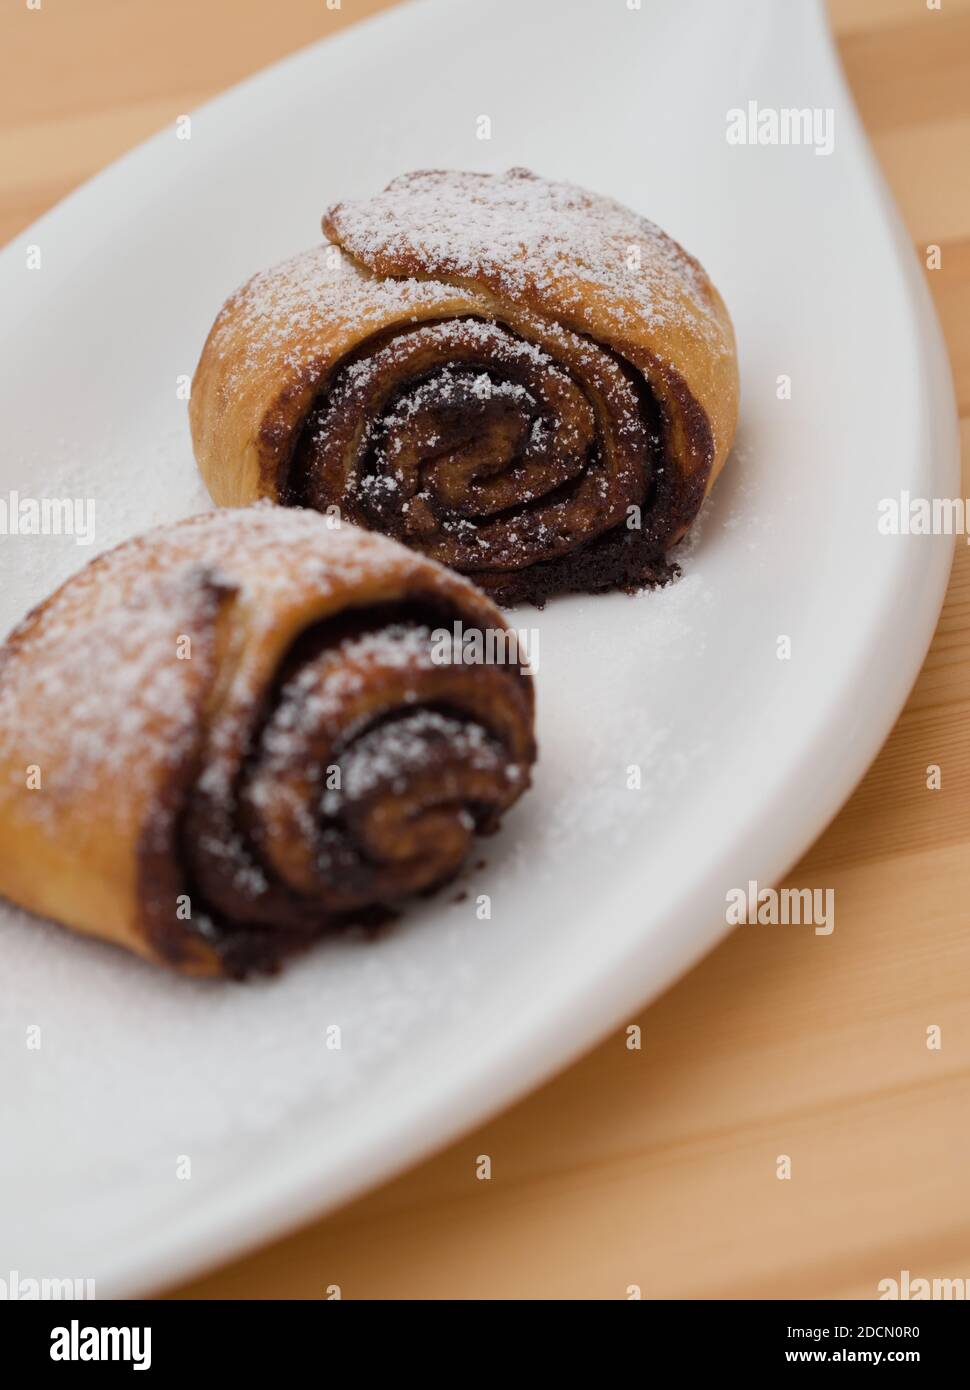 Delicious Cocoa Snails on a White Plate Closeup Stock Photo